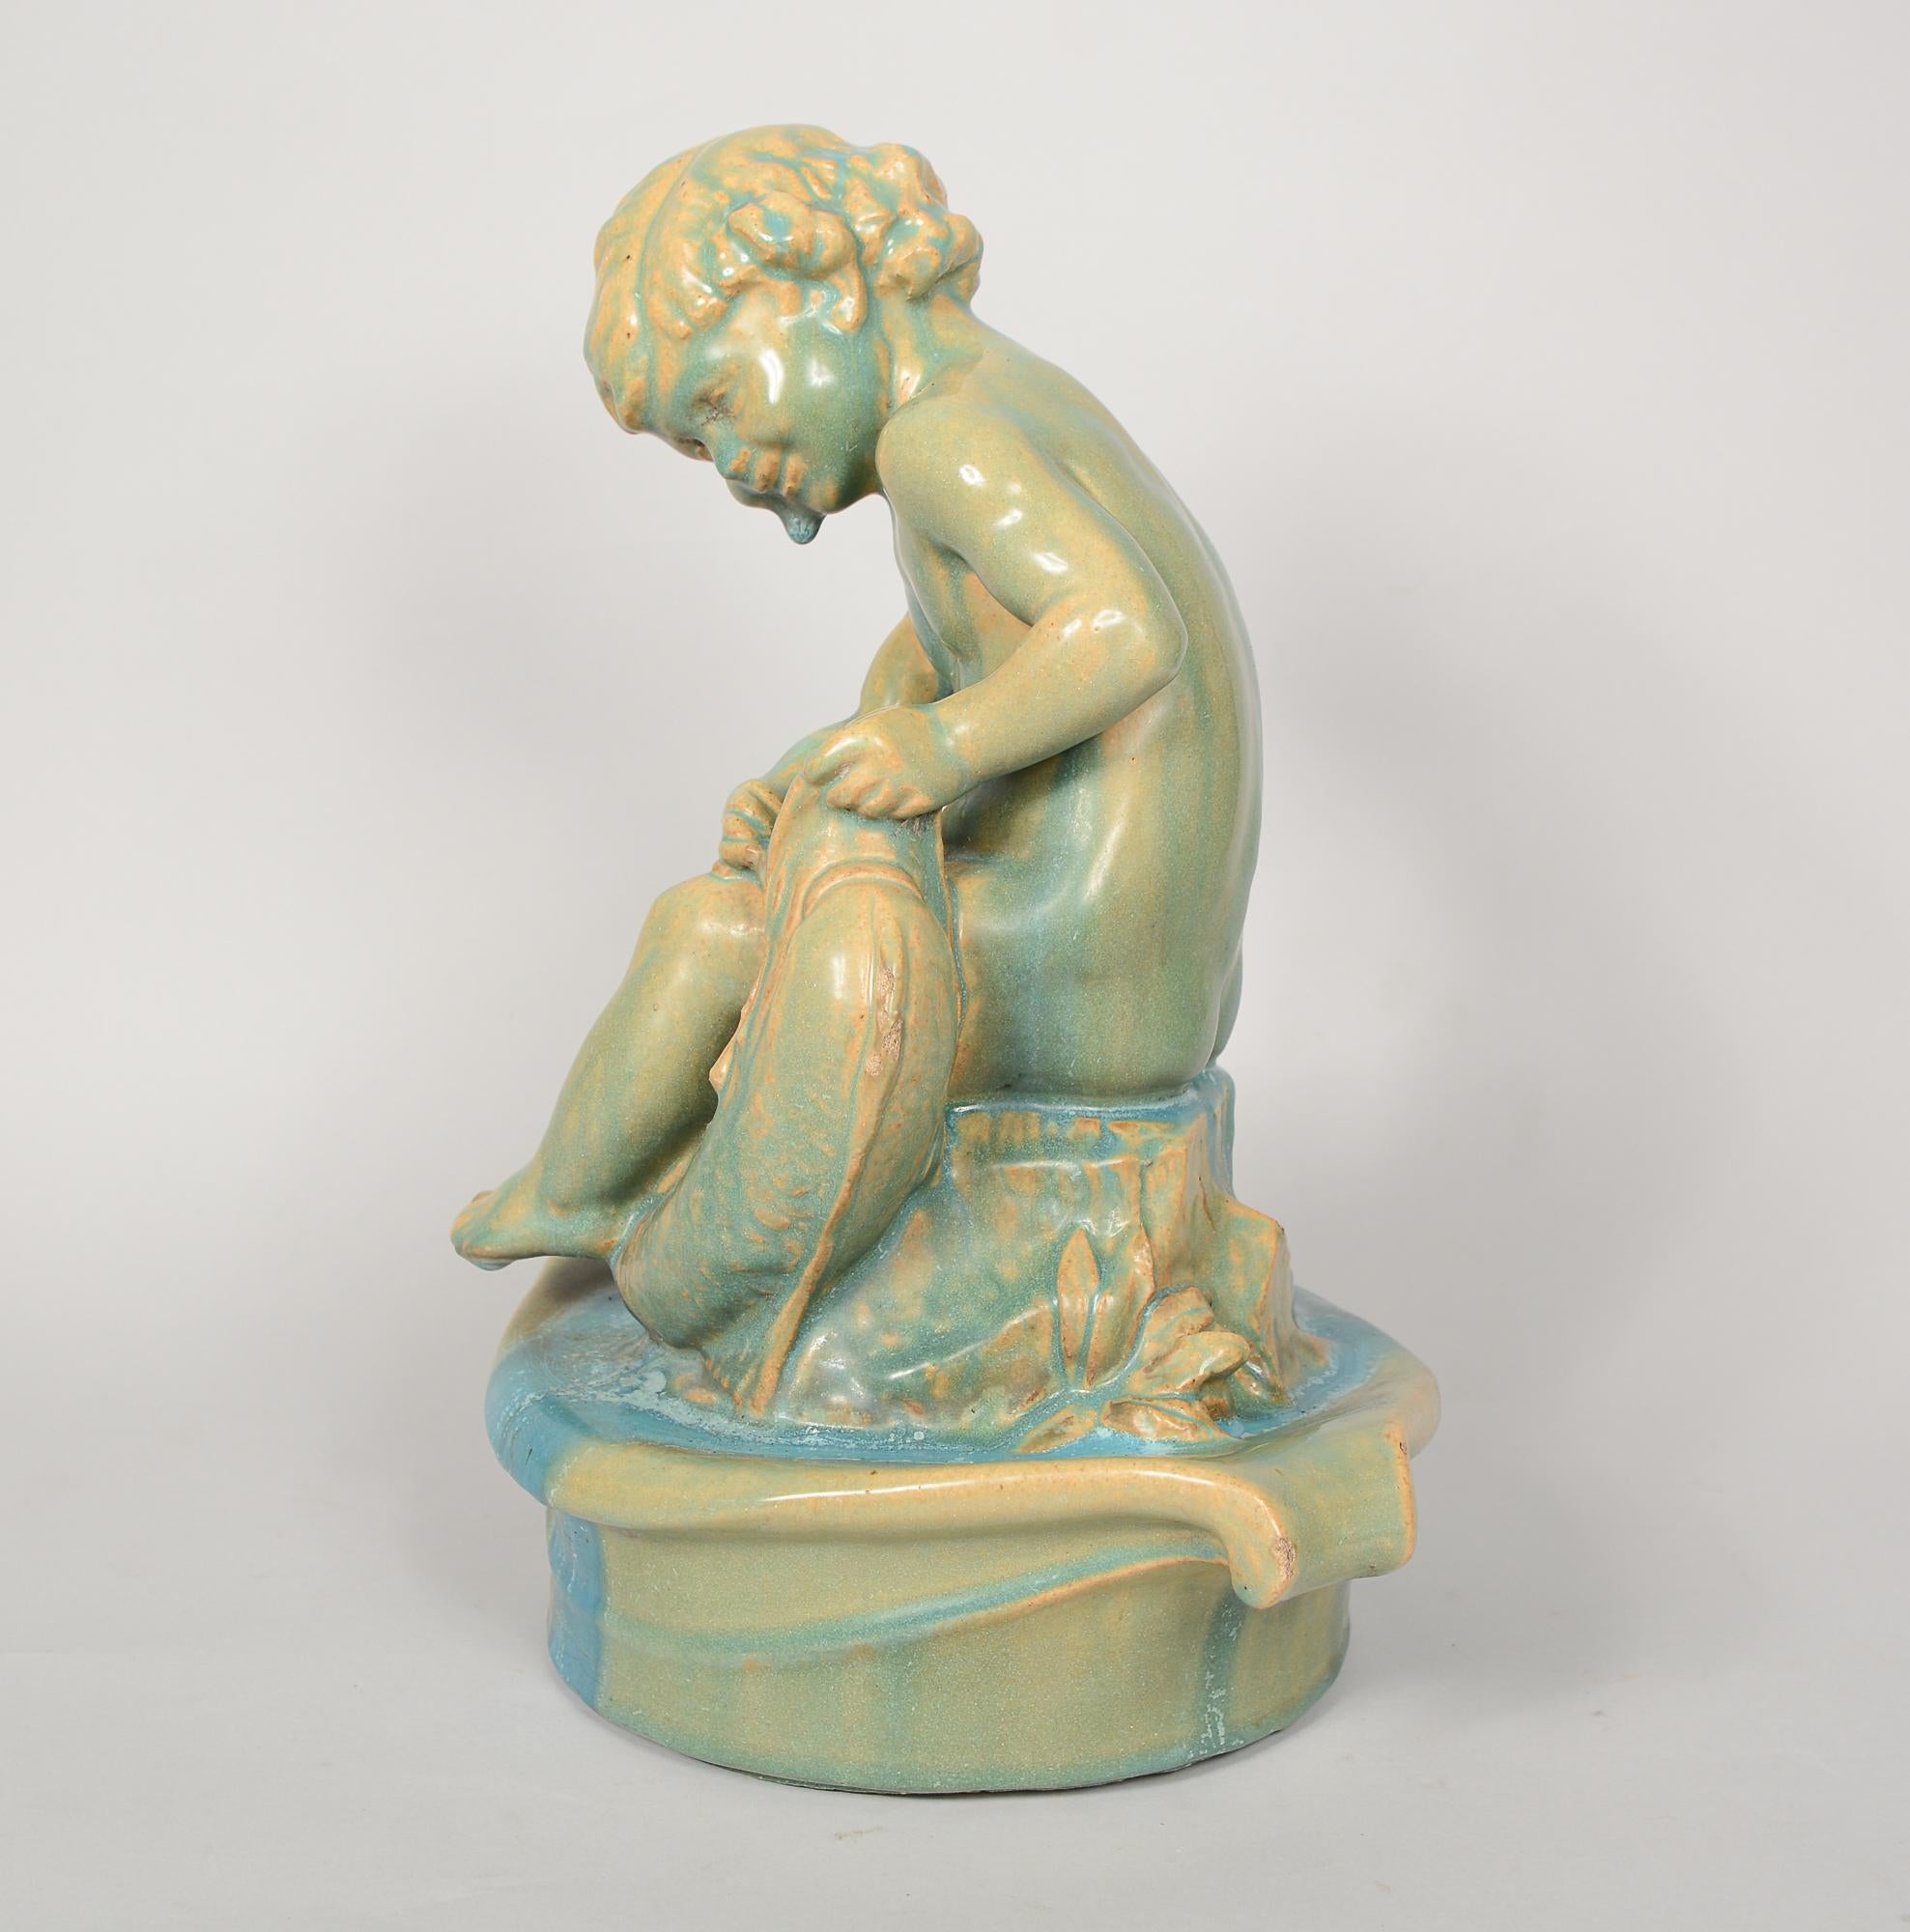 Fountain center piece of a child with a fish by the California pottery company, Gladding McBean. This has a dripping aqua blue glaze with the base clay showing through in areas. There are some chips to the piece, the hair has one, one toe, the